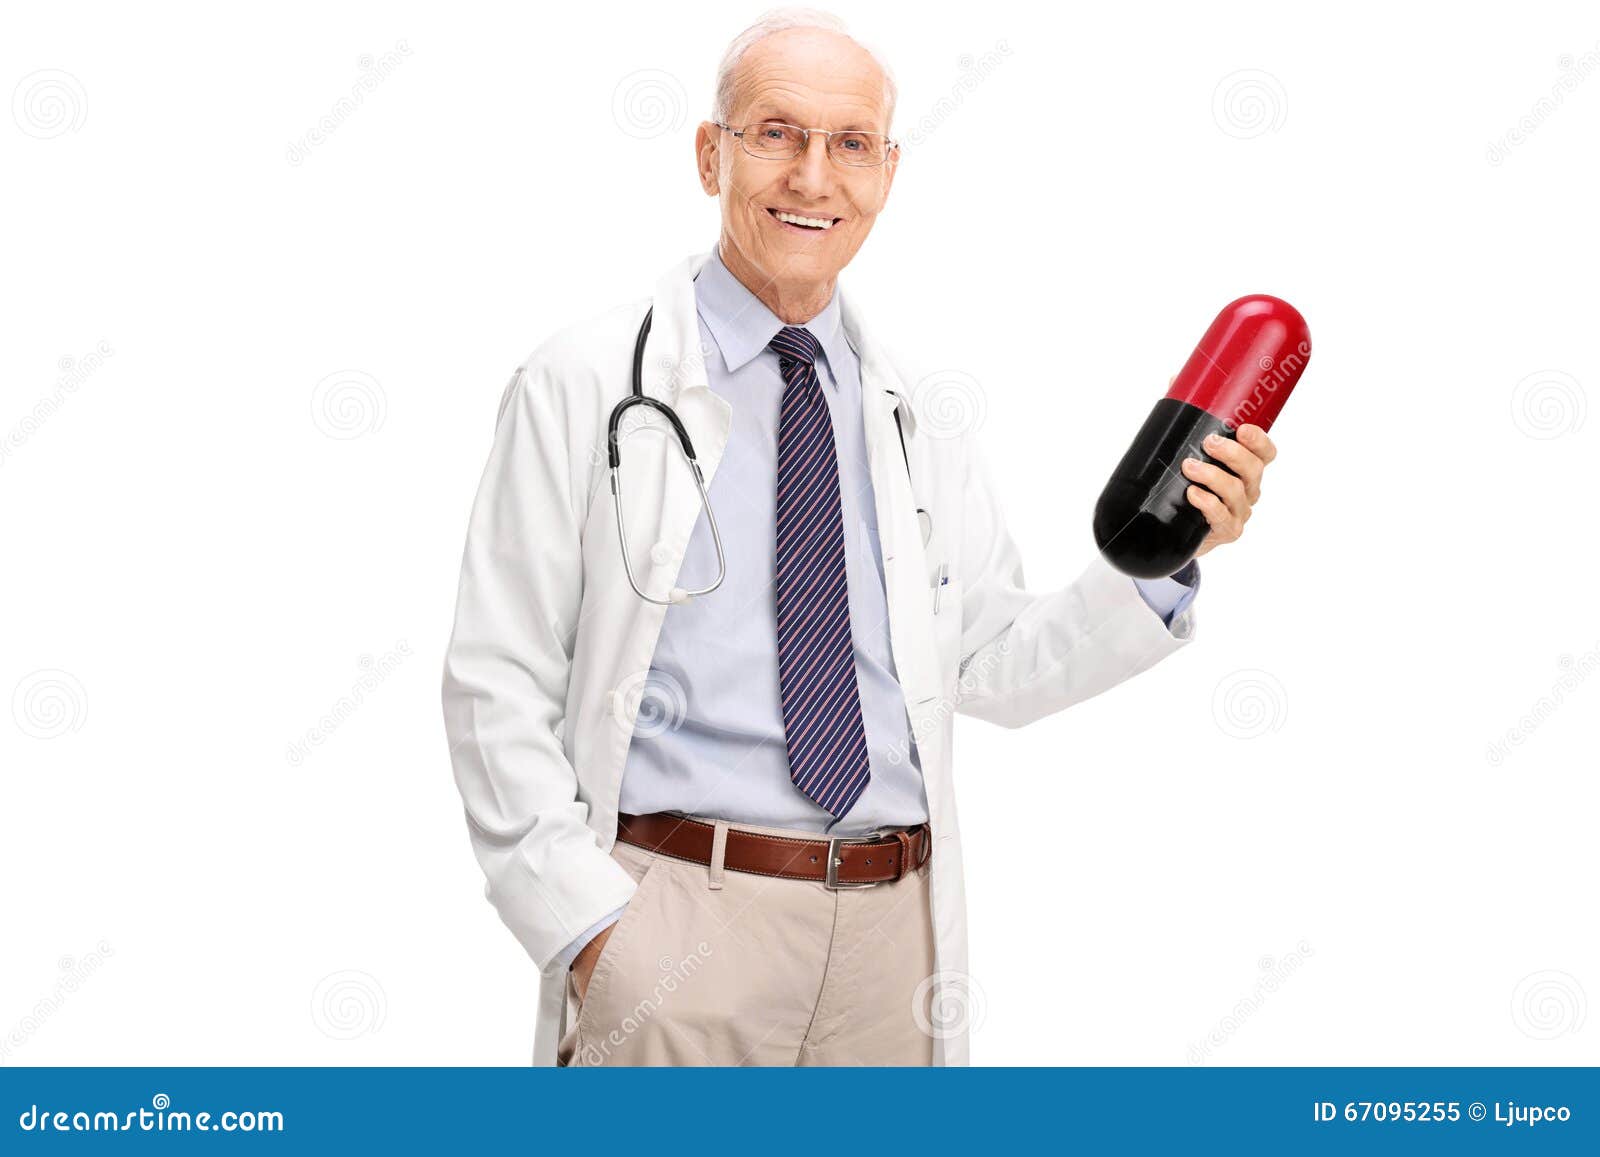 Mature Doctor Holding a Large Pill Stock Image - Image of lifestyle ...